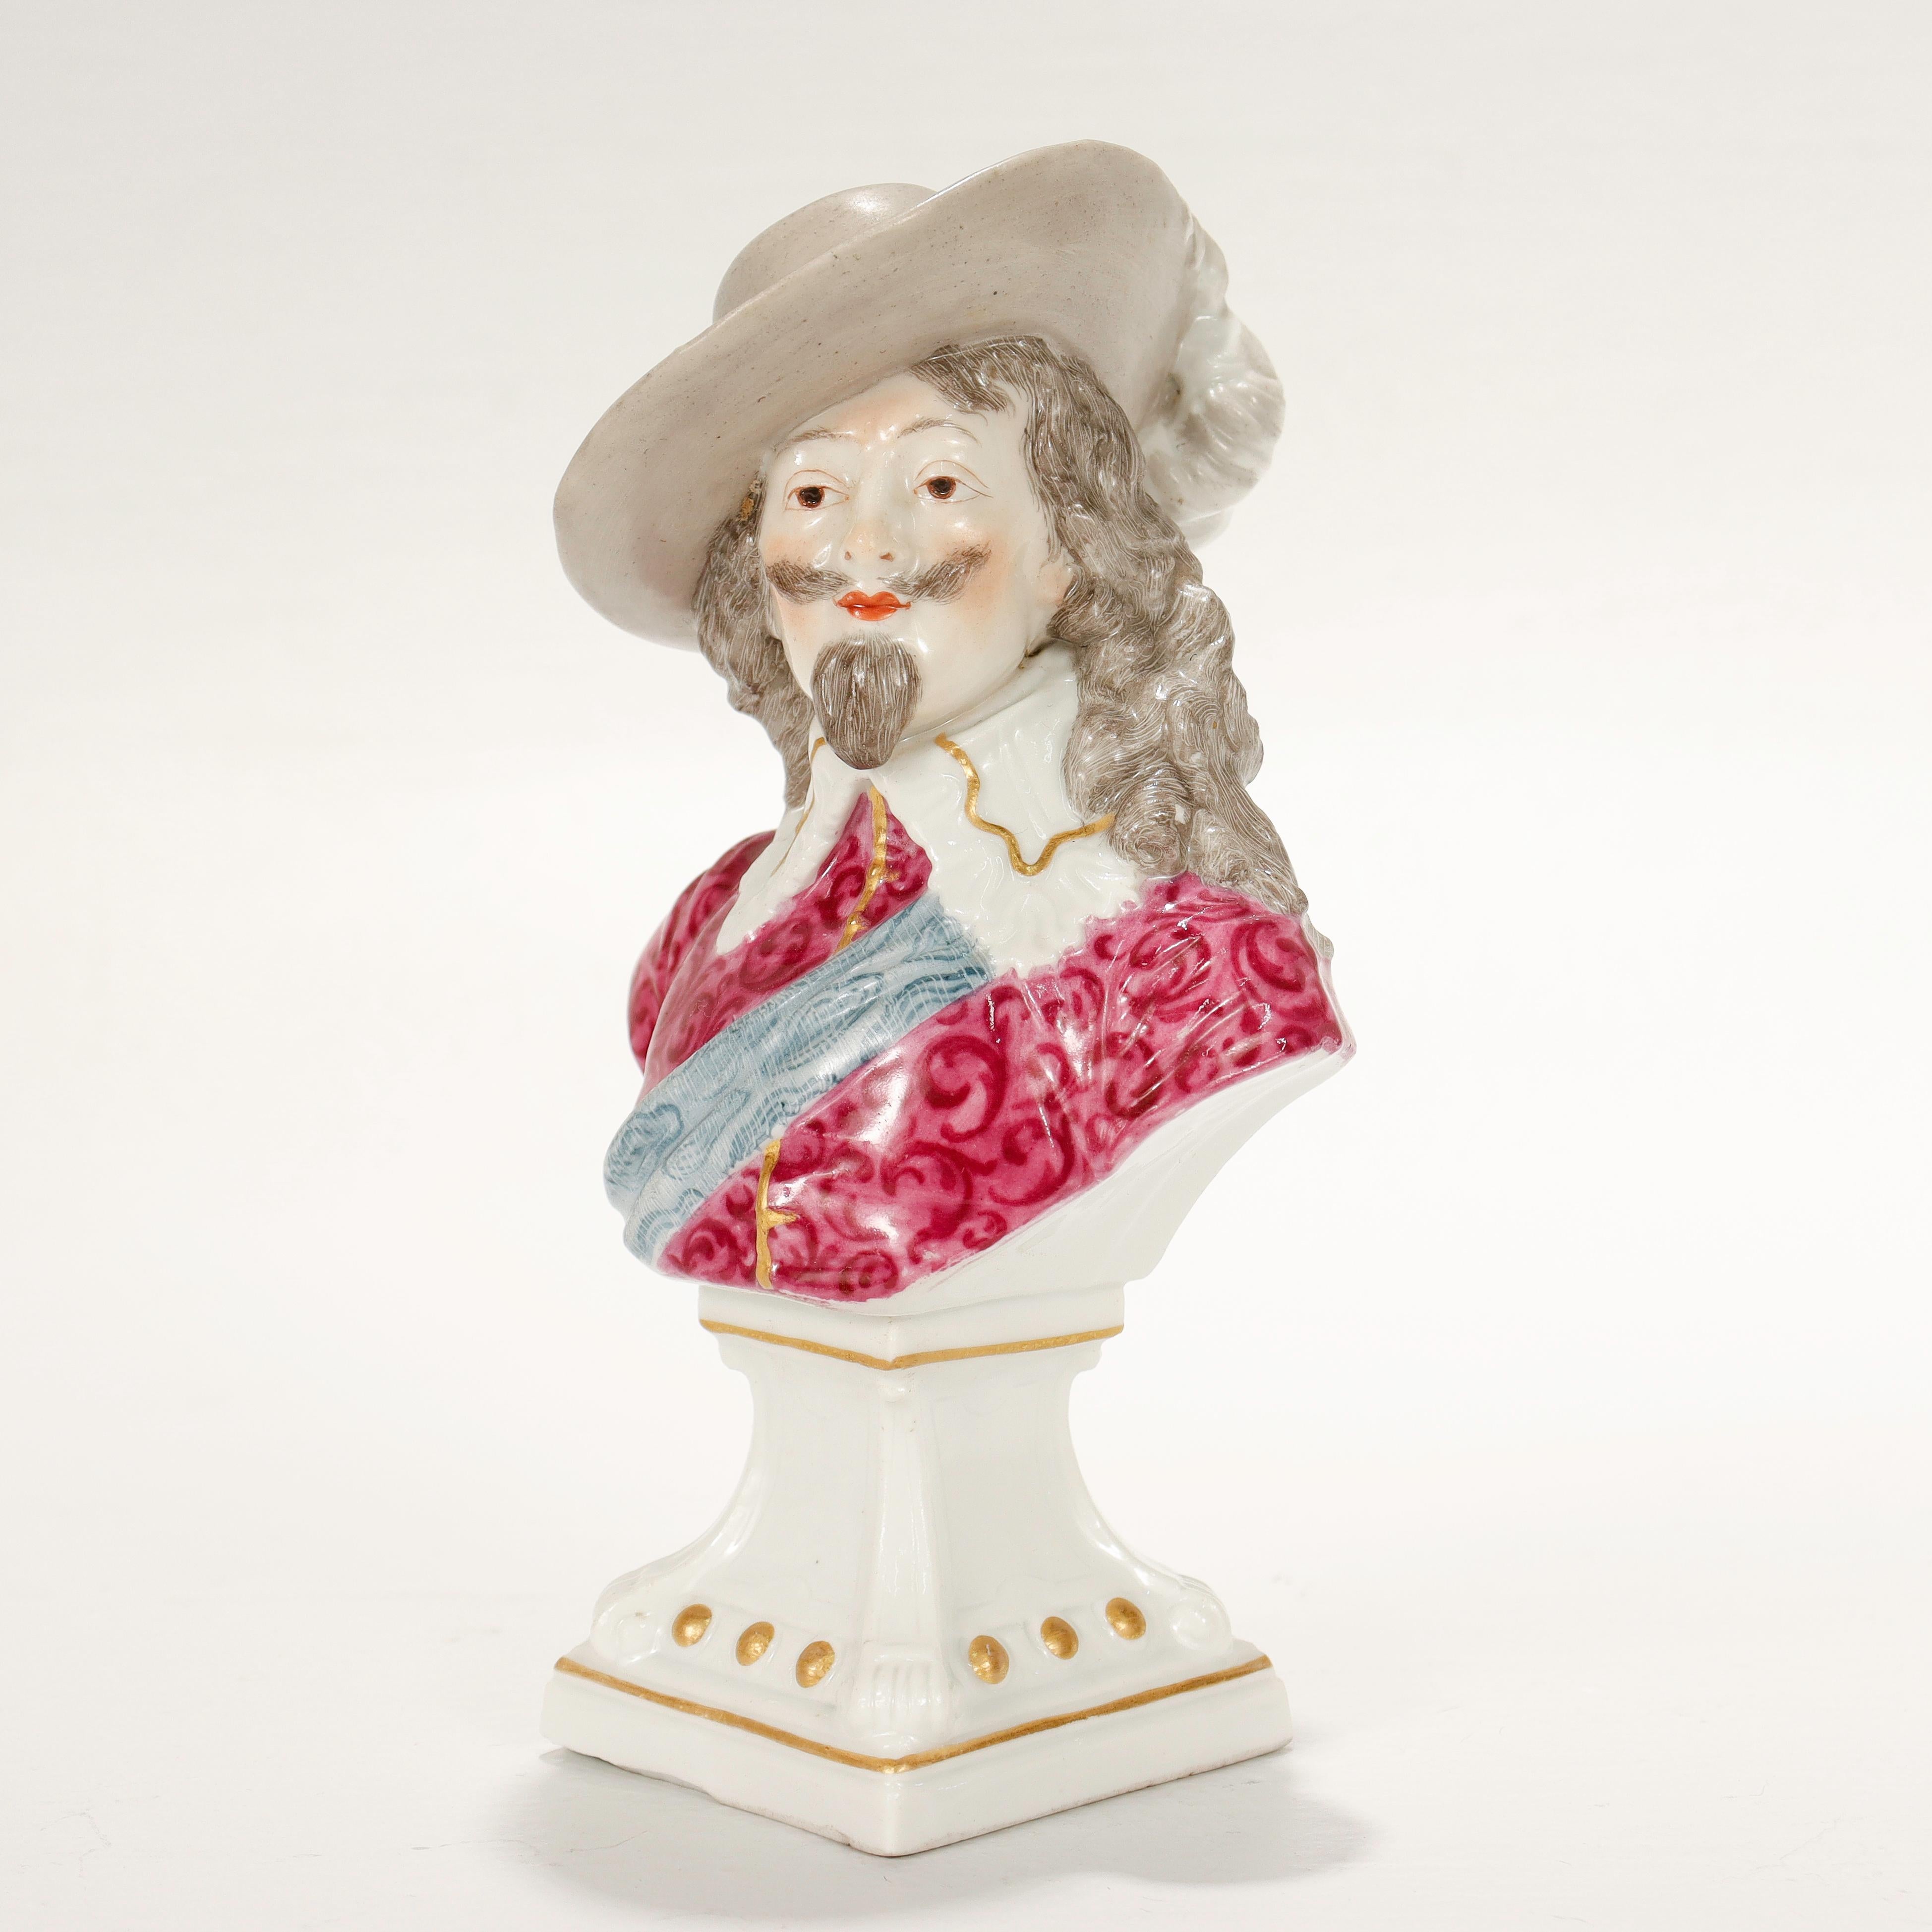 A fine antique porcelain figurine or bust.

By Samson Edmé et Cie.

In the form of a bust of a man dressed in colorful finery with a frilled collar and feathered hat. 

Set atop a white plinth with gilt highlights.

Marked to the reverse of